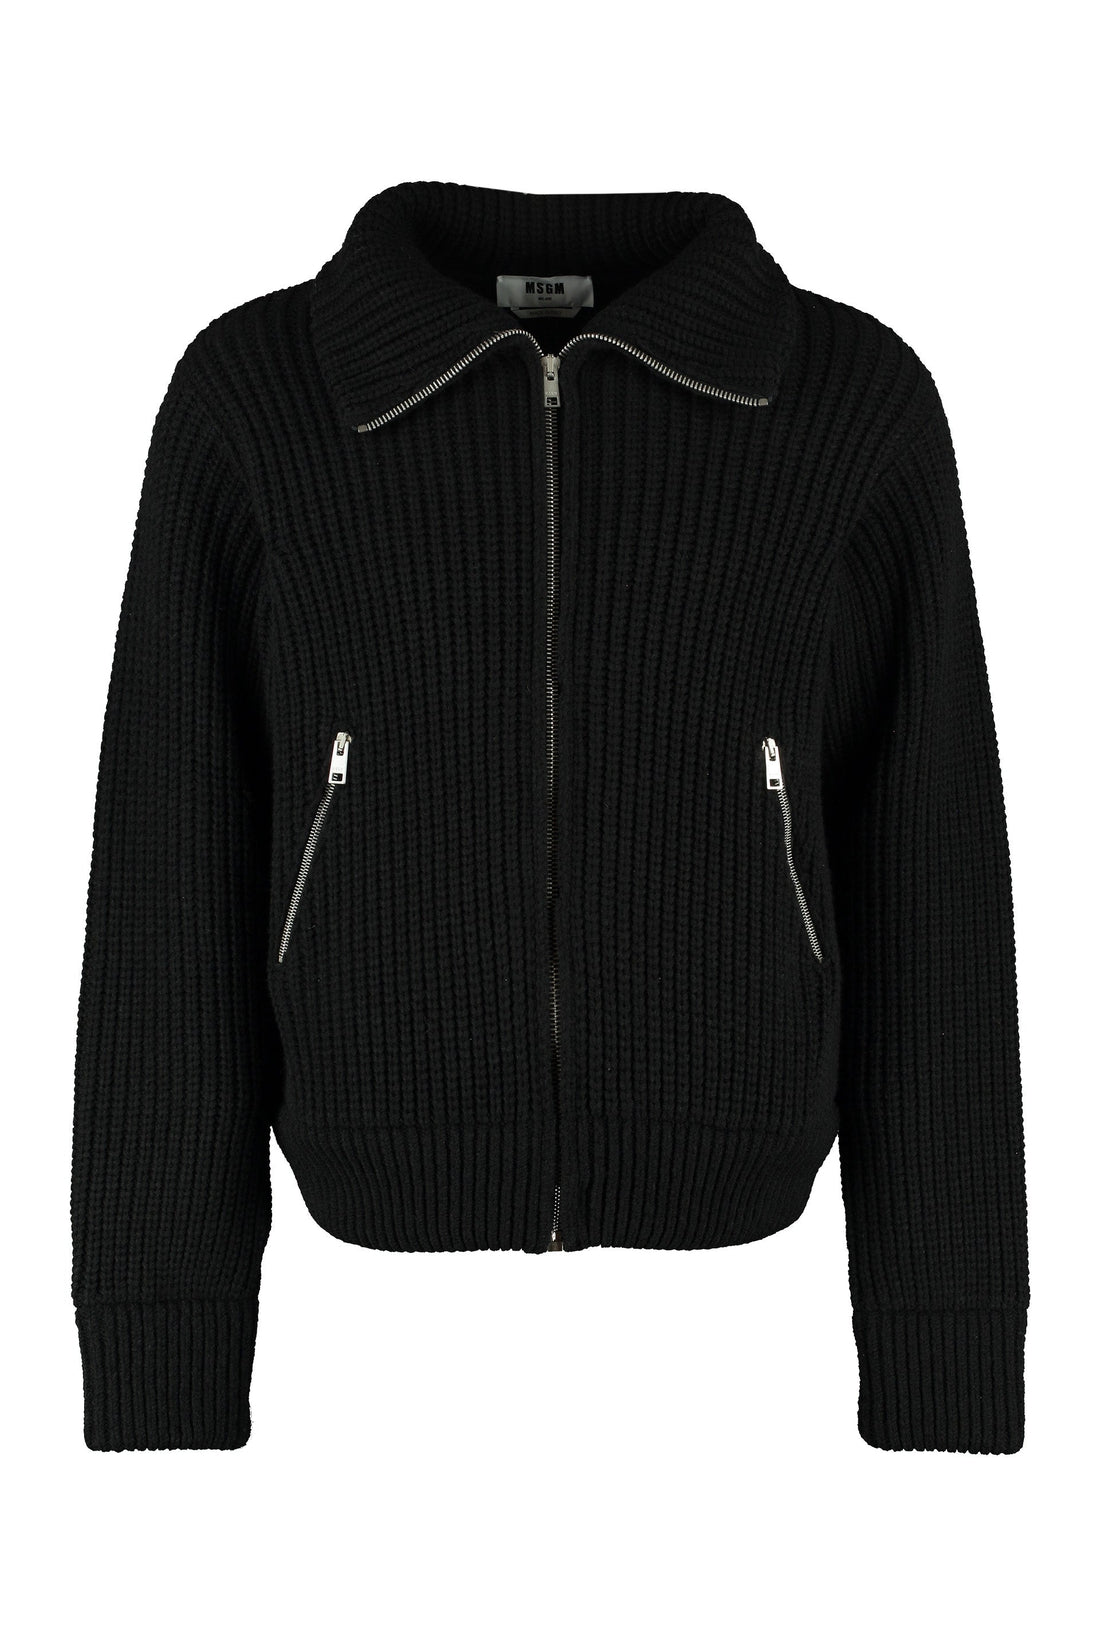 MSGM-OUTLET-SALE-High collar zipped cardigan-ARCHIVIST